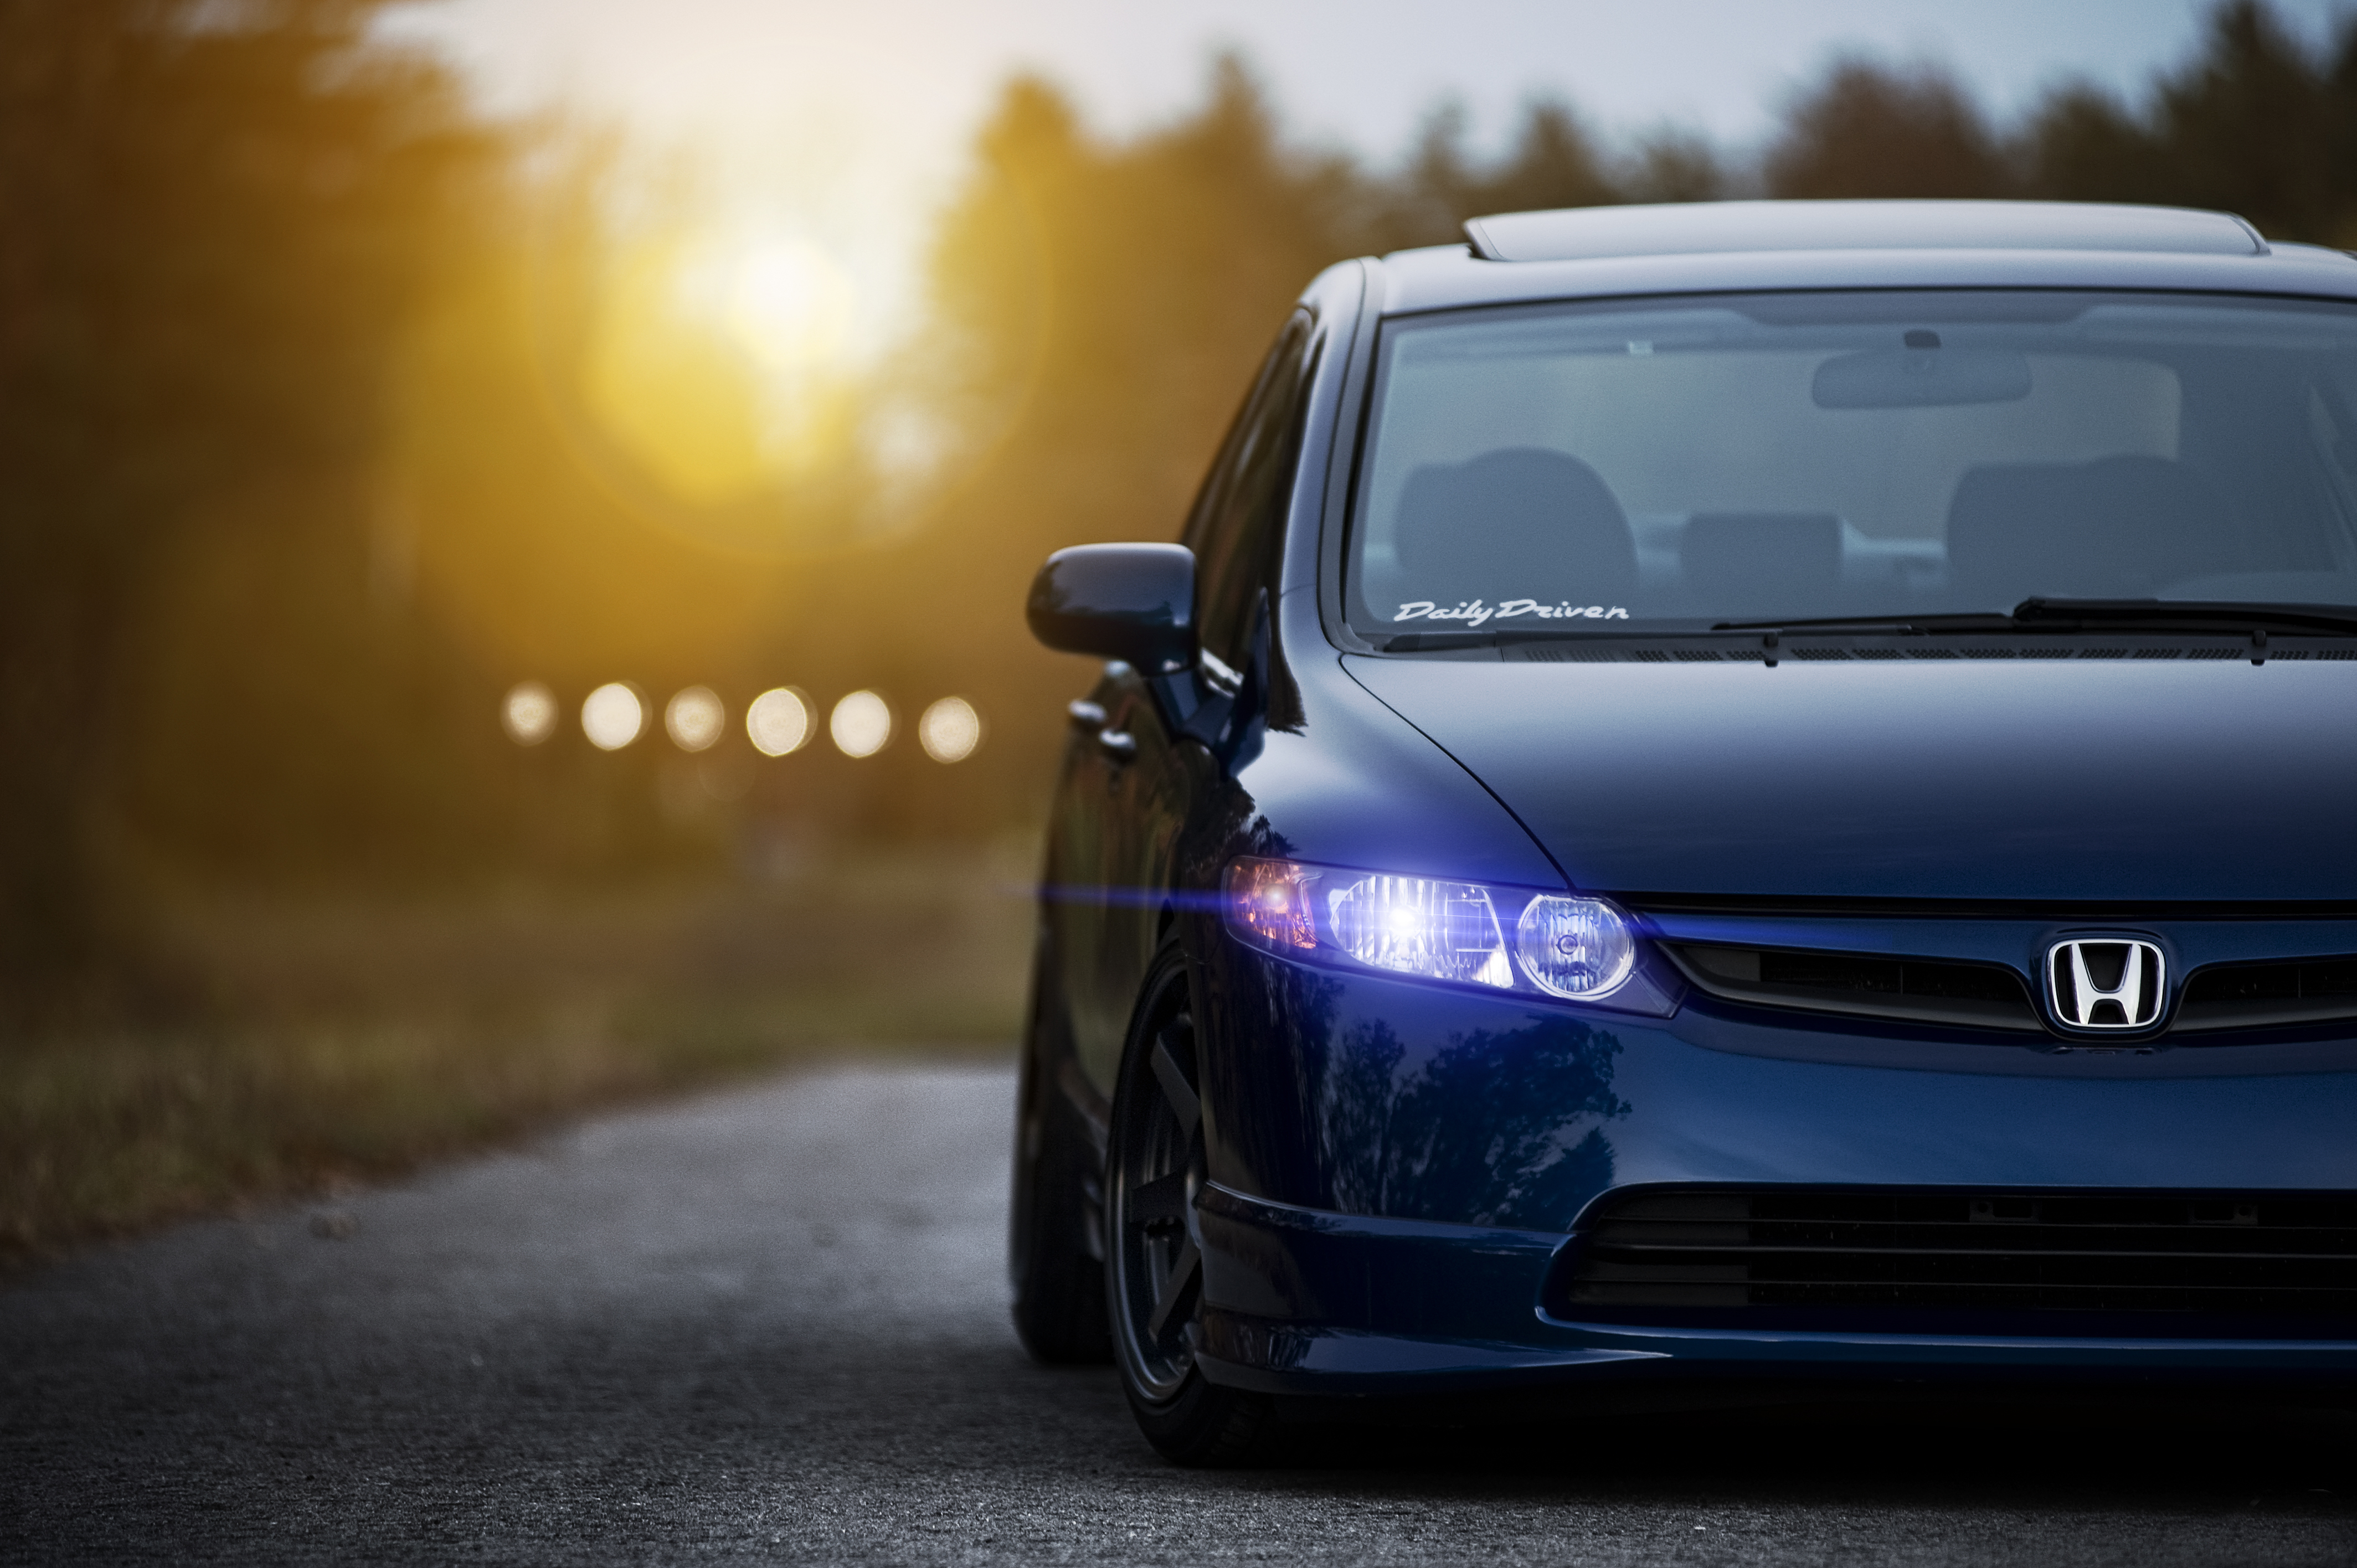 50+ Honda Civic HD Wallpapers and Backgrounds